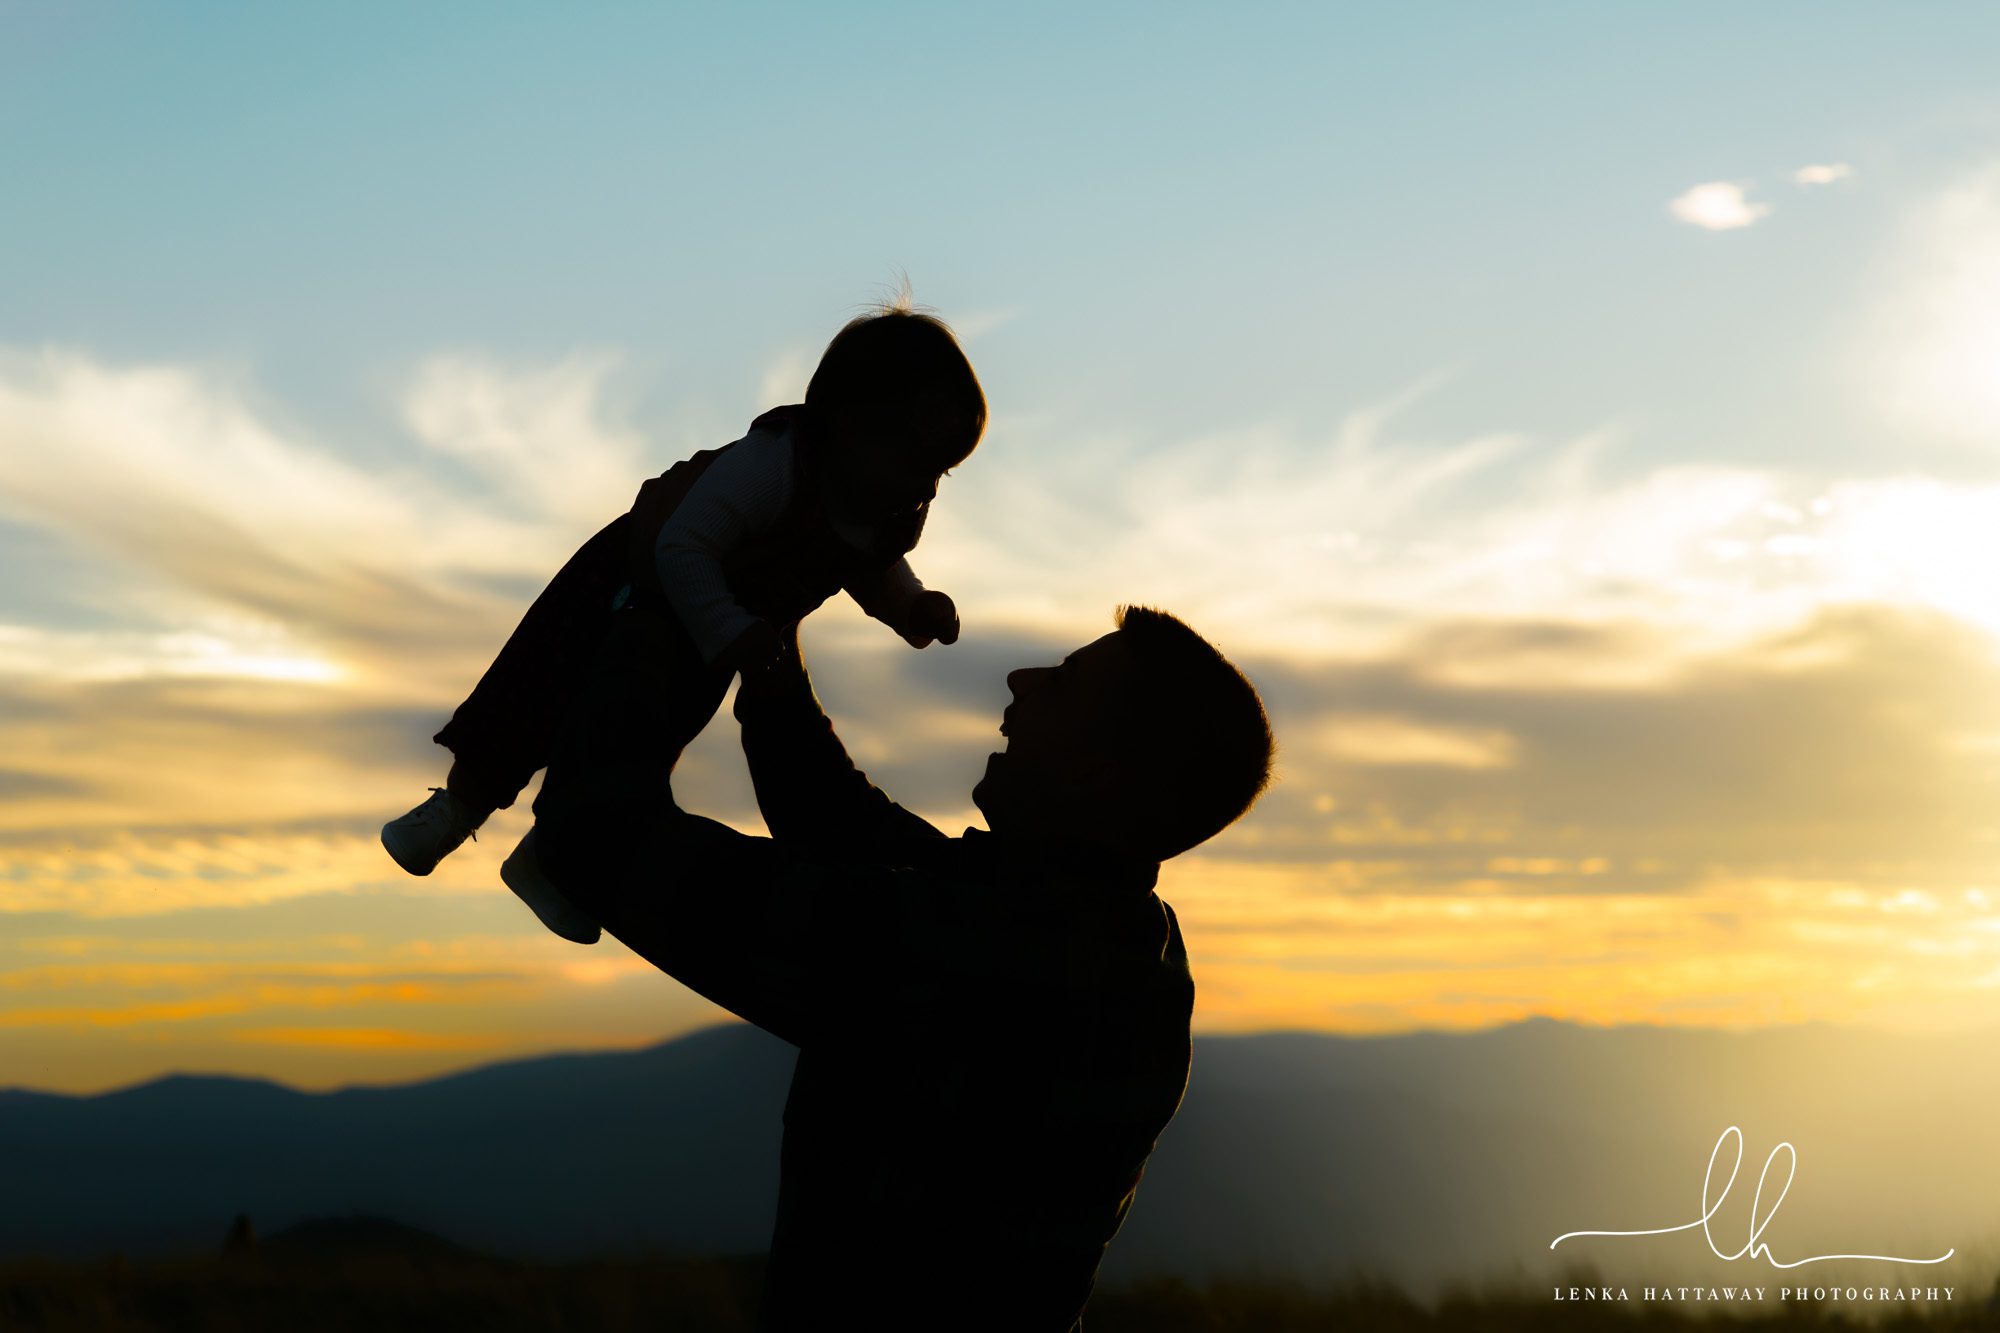 Lovely silhouette of dad and baby in the mountains.